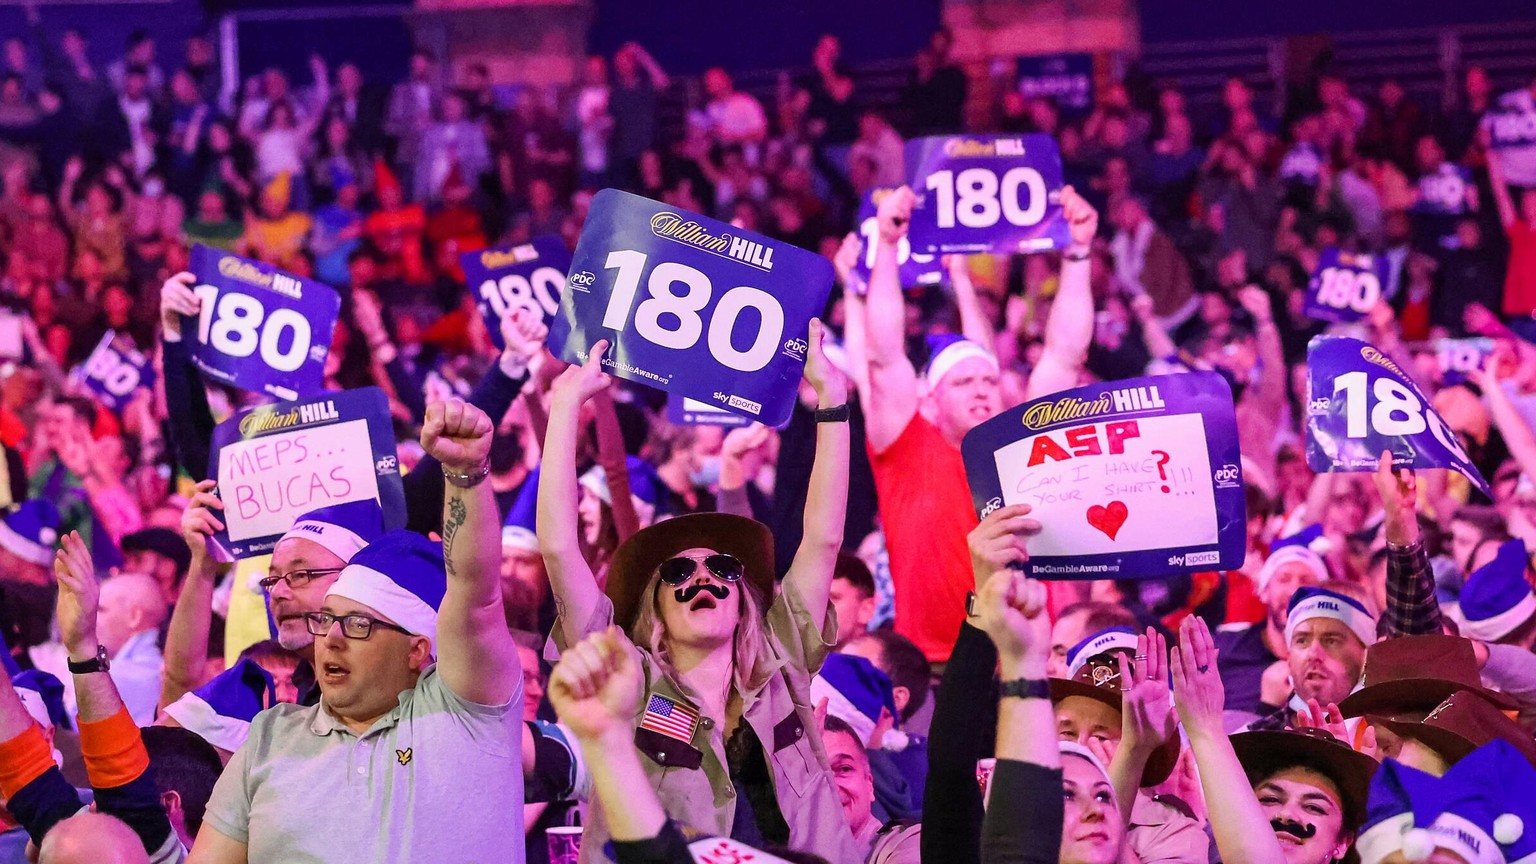 IMAGO / Pro Sports Images

PDC World Darts Championship 2022 Fans show cards after Callan Rydz scores 180 during the PDC World Darts Championship 2022, at Alexandra Palace, London, United Kingdom on 2 ...